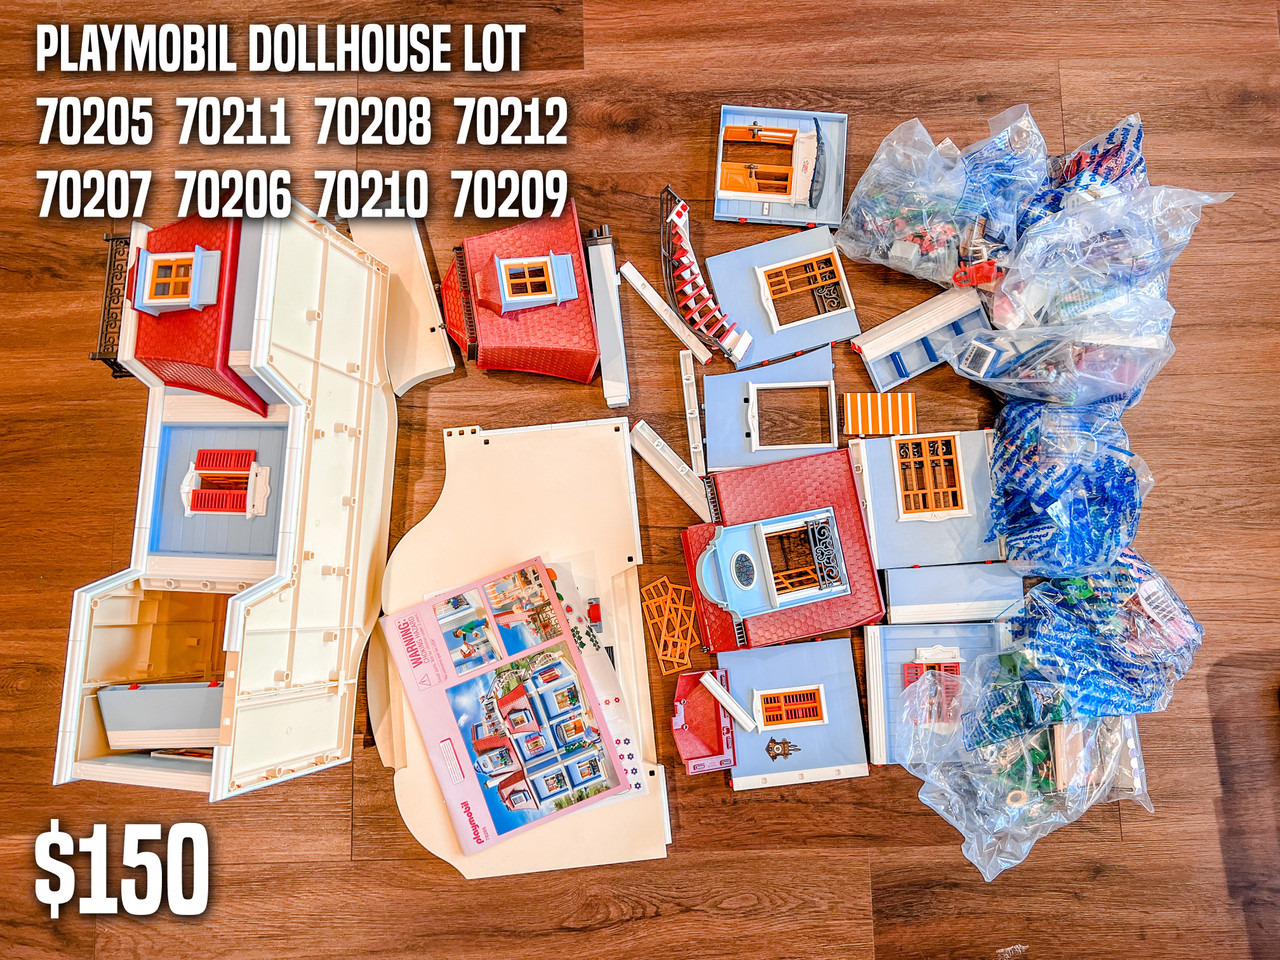 Playmobil Large Dollhouse Lot - 70205, 70211, 70208, 70212, 70207, 70206,  70210 & 70209 - Unopened Demos - The Fun Company